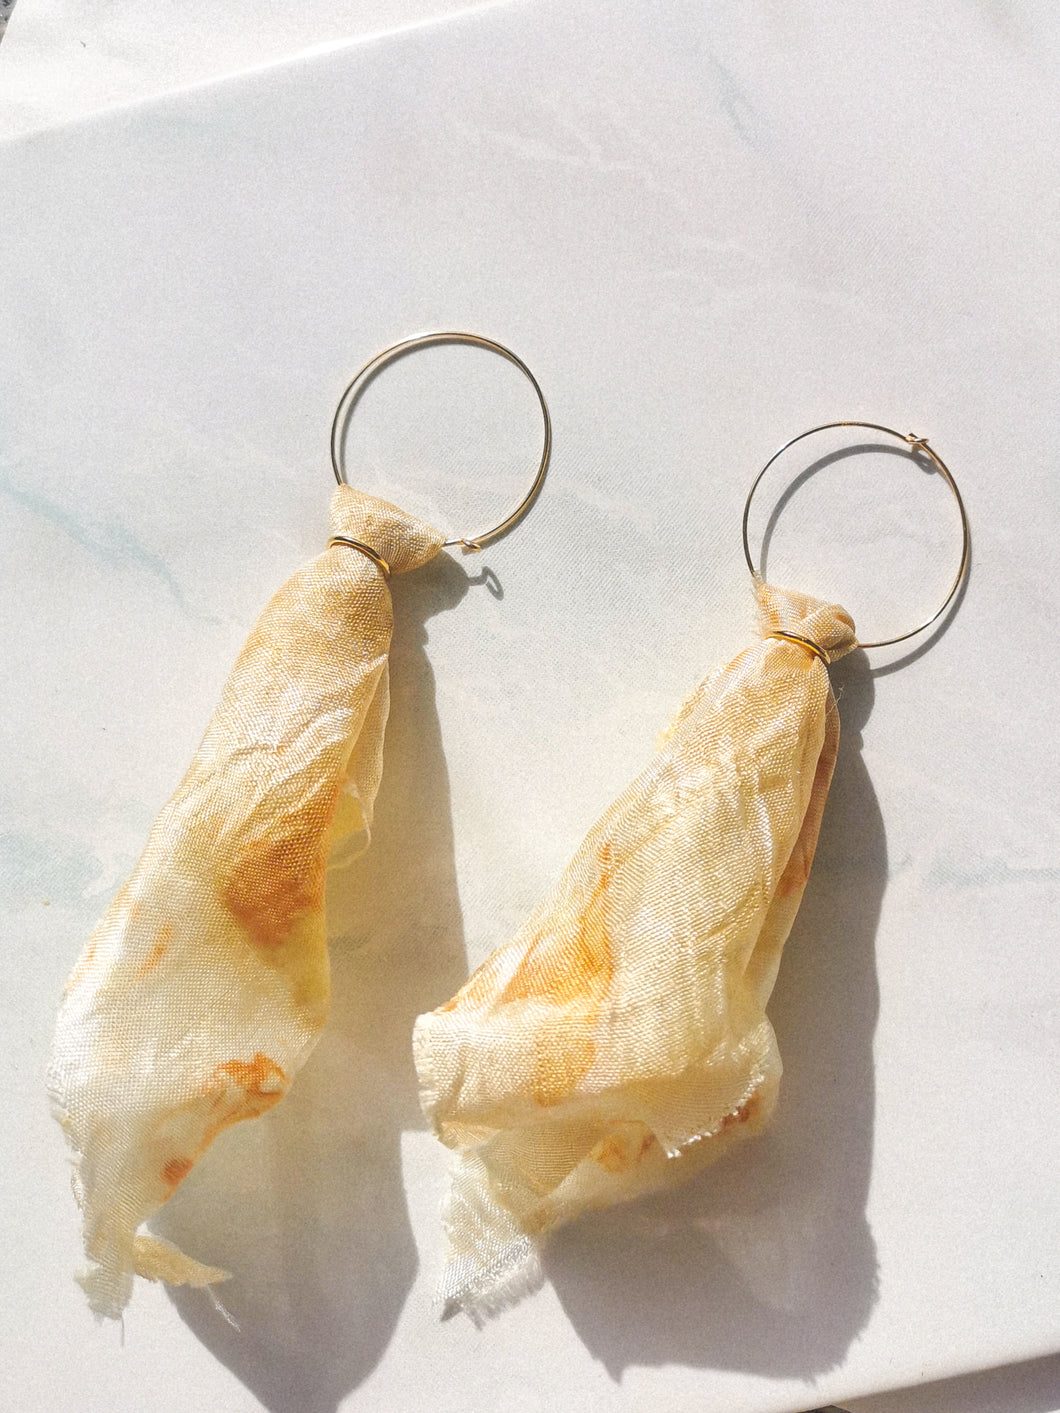 Naturally dyed silk earrings